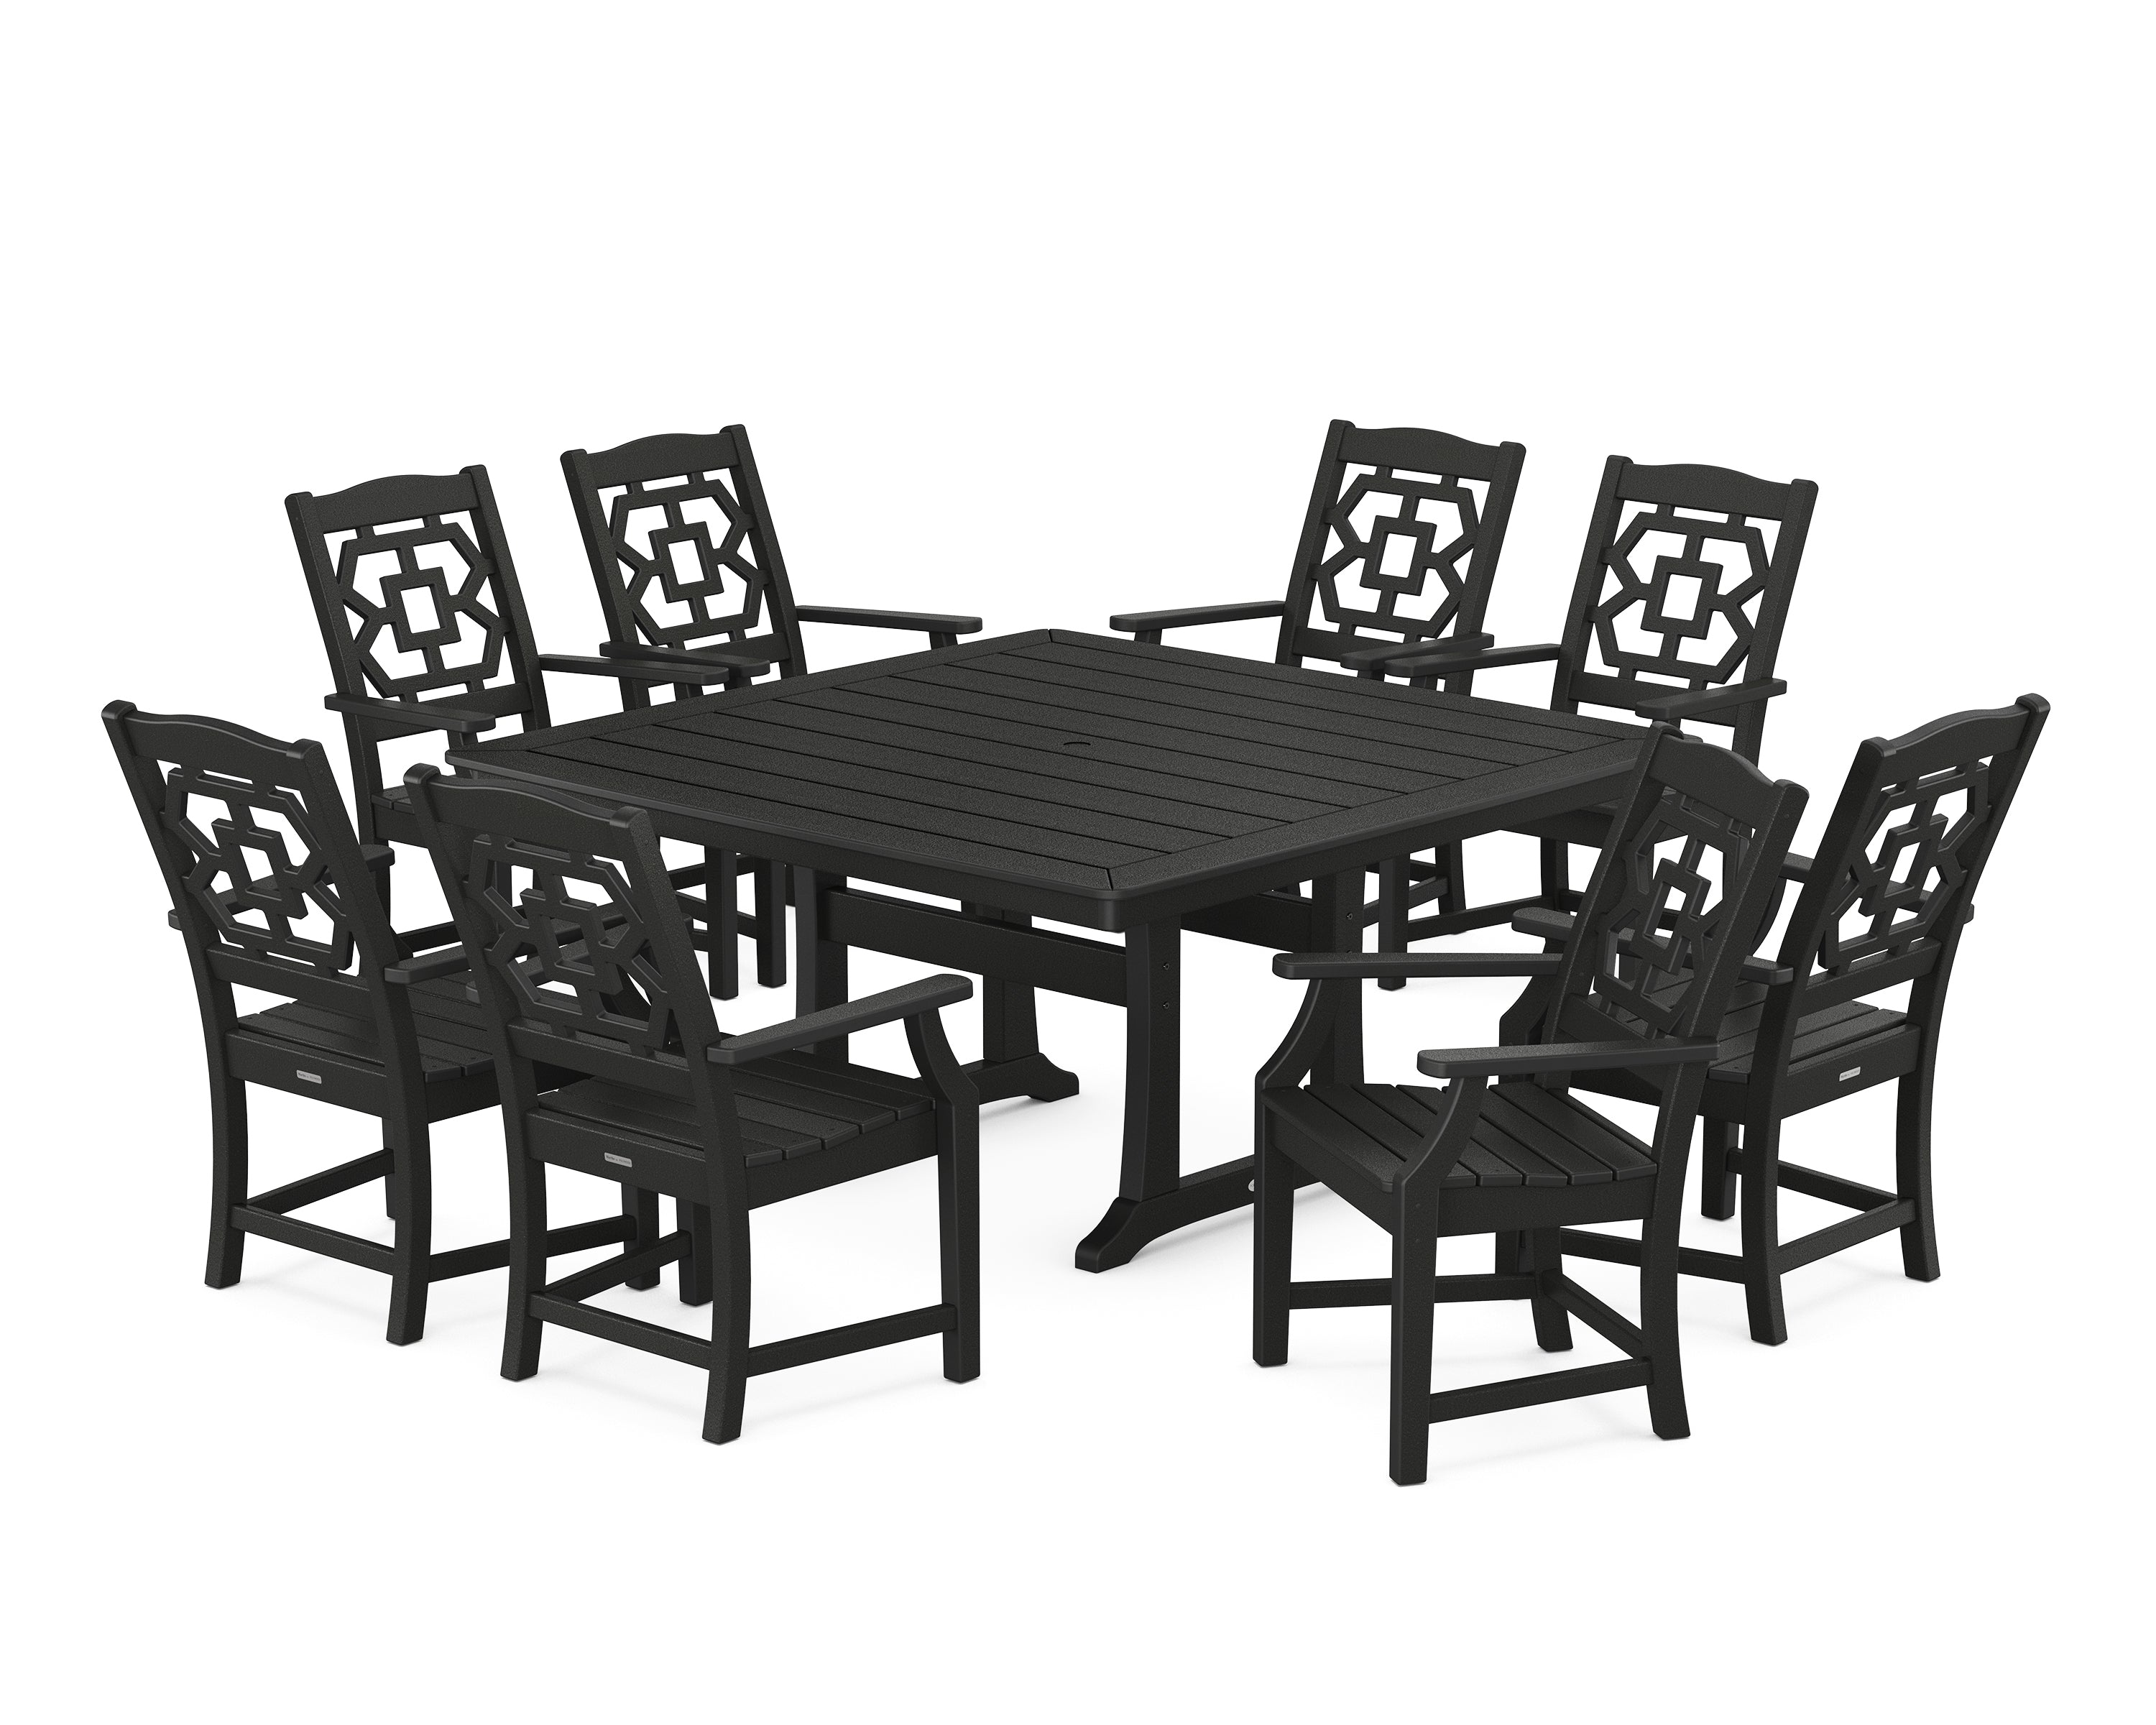 Martha Stewart by POLYWOOD® Chinoiserie 9-Piece Square Dining Set with Trestle Legs in Black